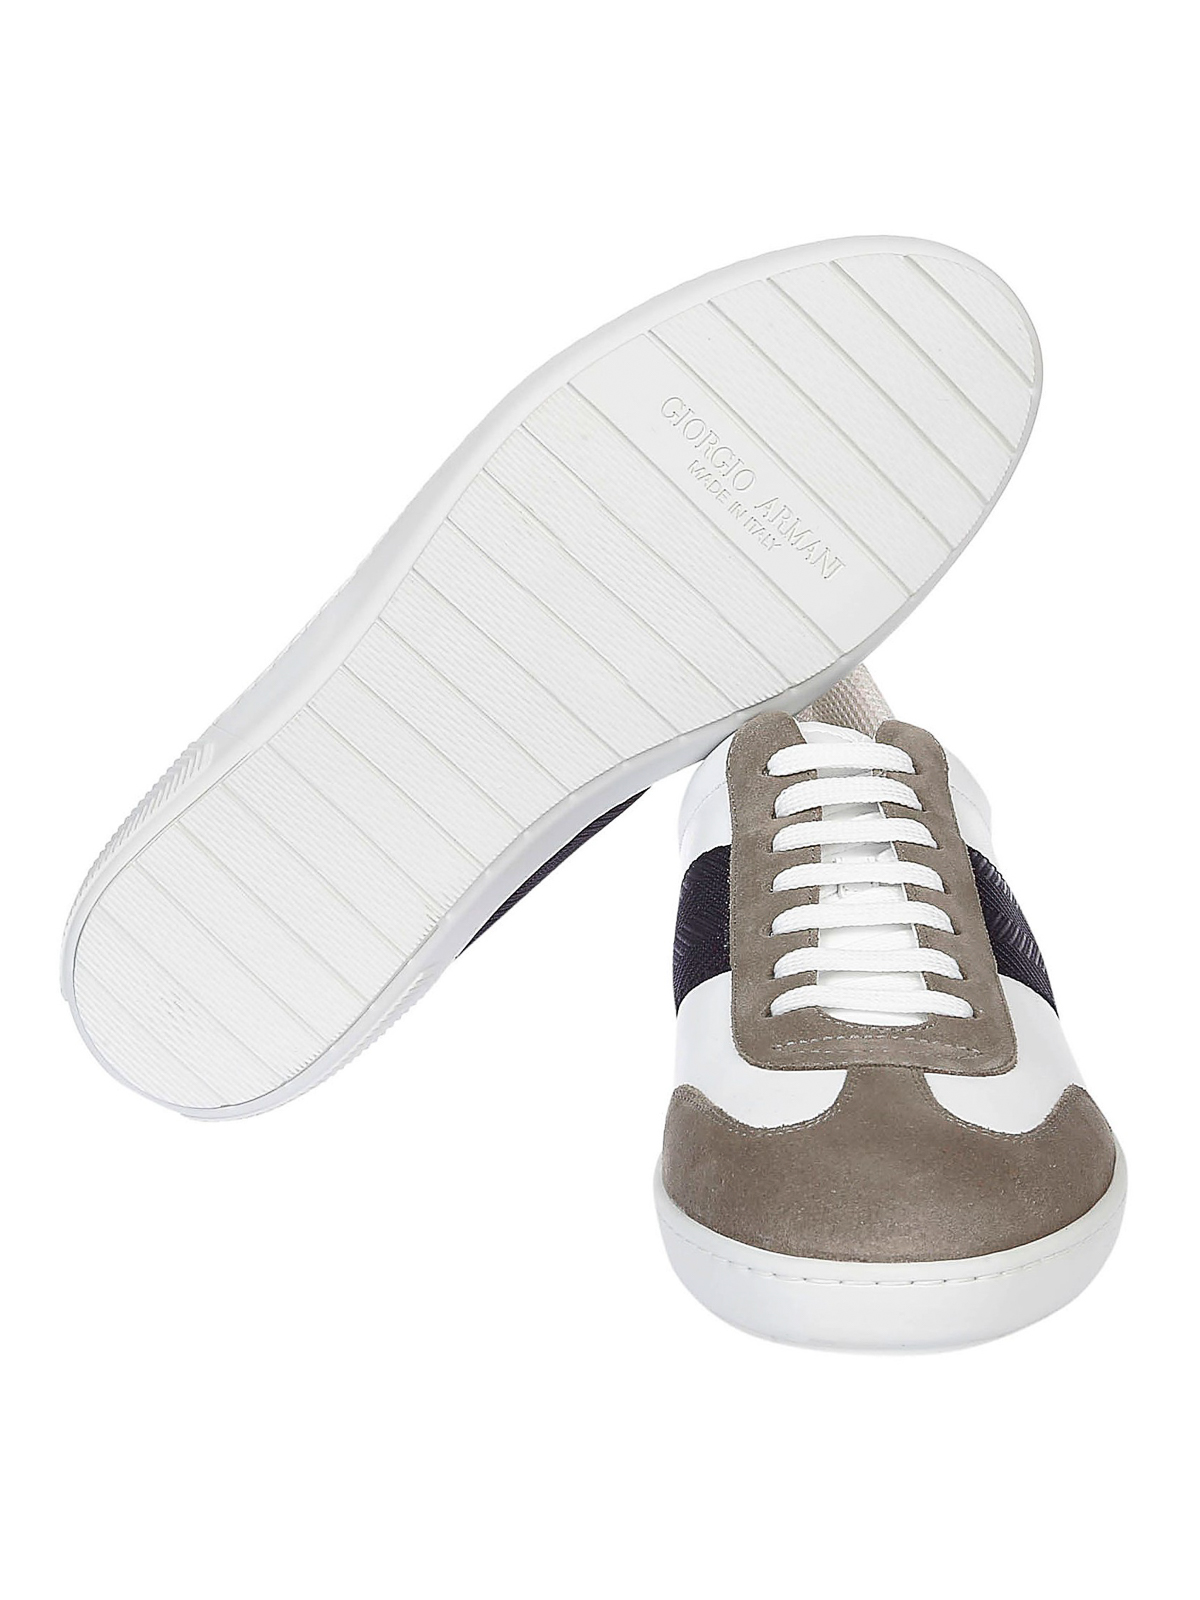 Veroveren Lieve Schaar Trainers Giorgio Armani - Two-tone leather and suede sneakers -  X2X097XL930N961